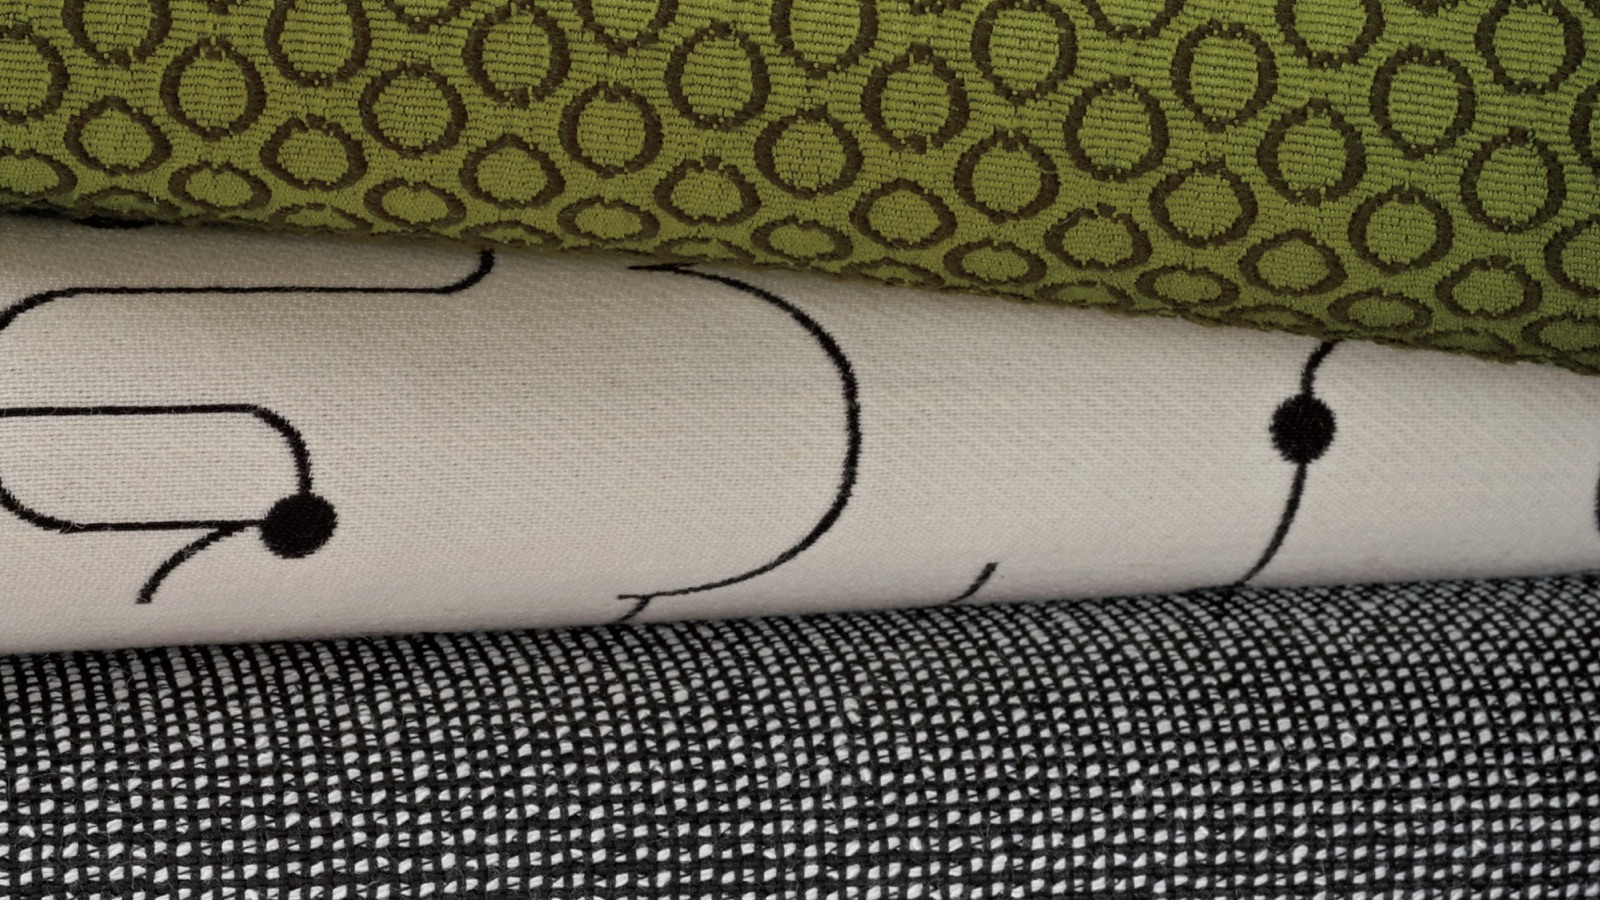 Layers of folded fabric samples, including a green patterned fabric, a black and white checked fabric, and a fabric with a lined pattern.